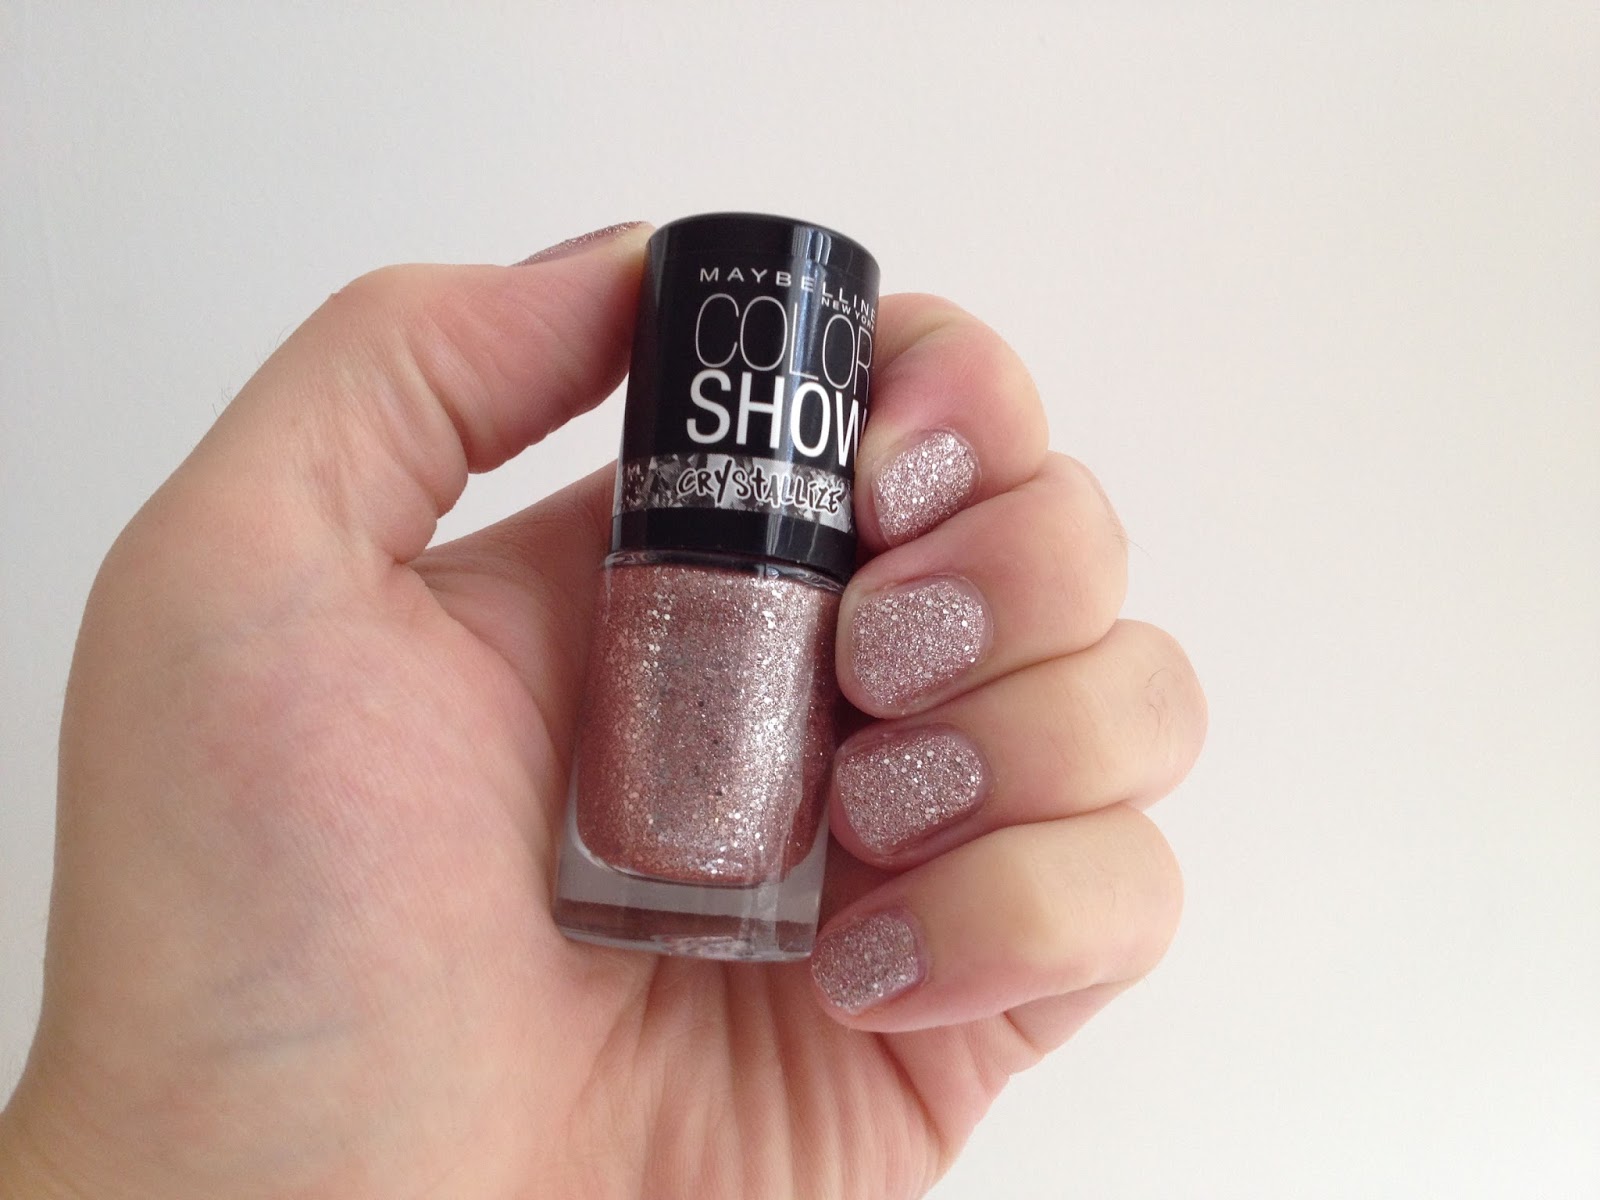 Maybelline Color Show Nail Polish in Neutral Statement - wide 2